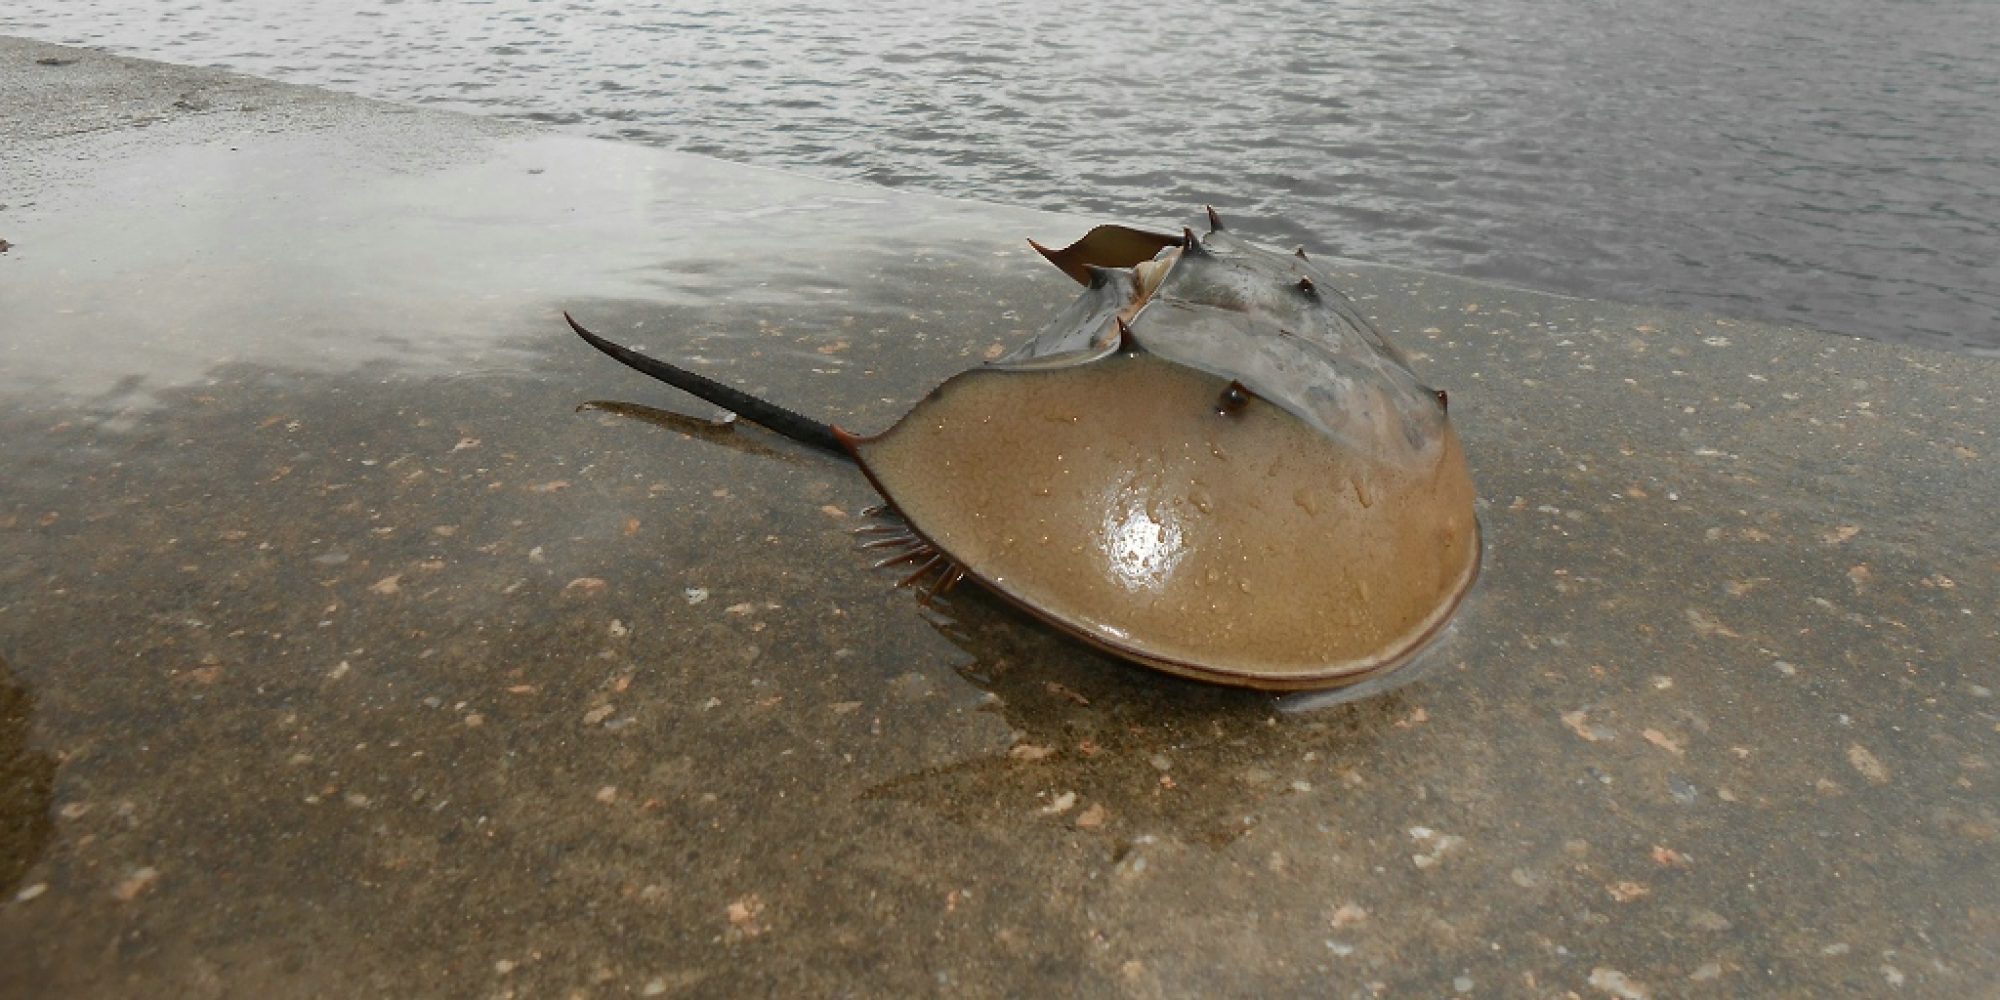 BSAP – Horseshoe Crab Survey and eDNA project